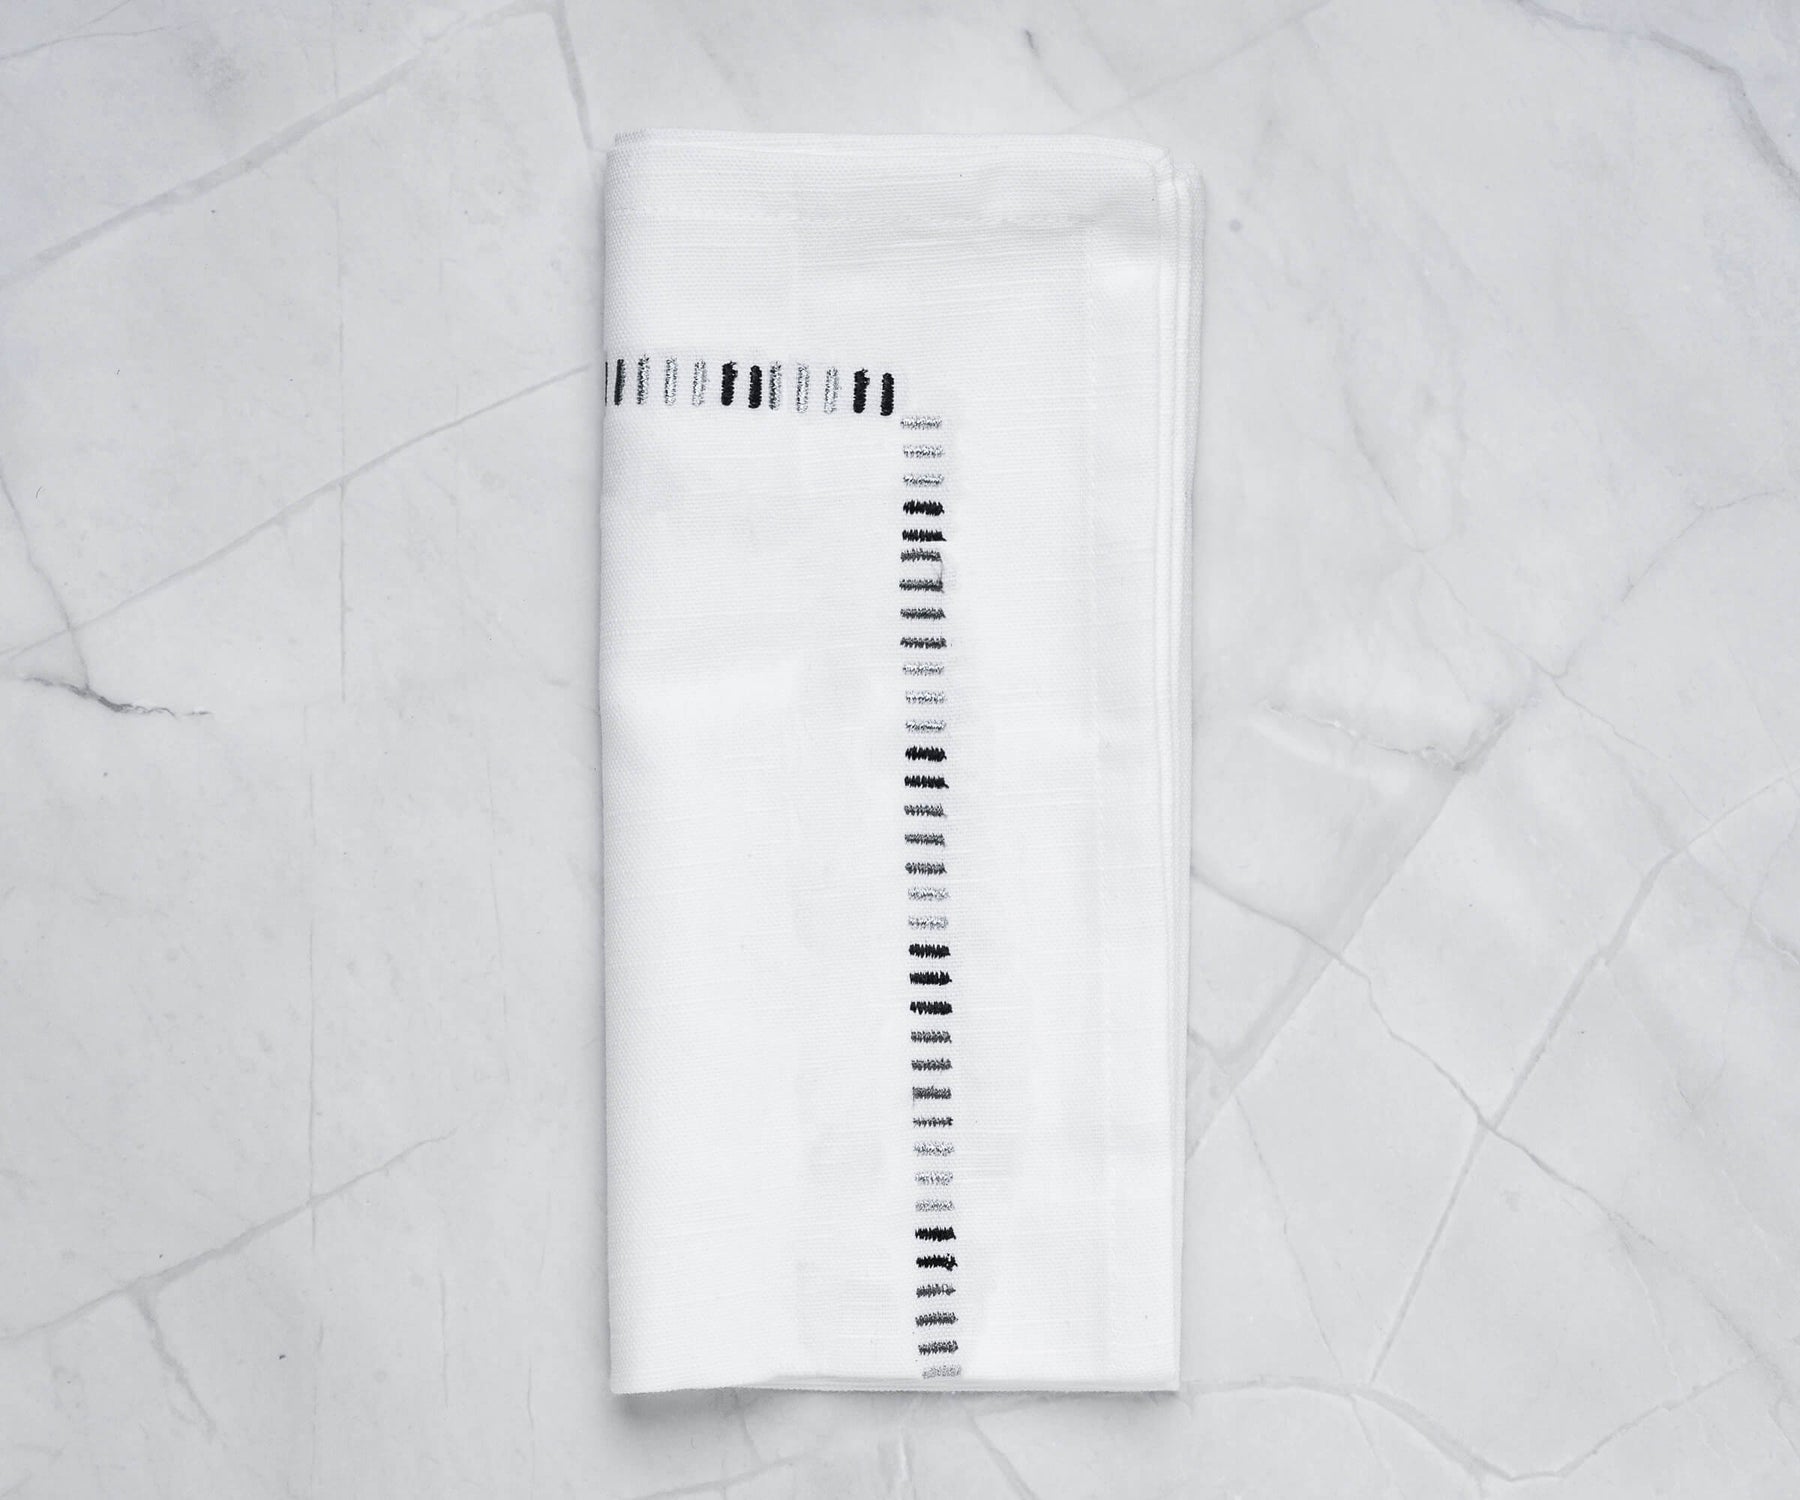 Premium quality cloth napkins crafted from 100% cotton.